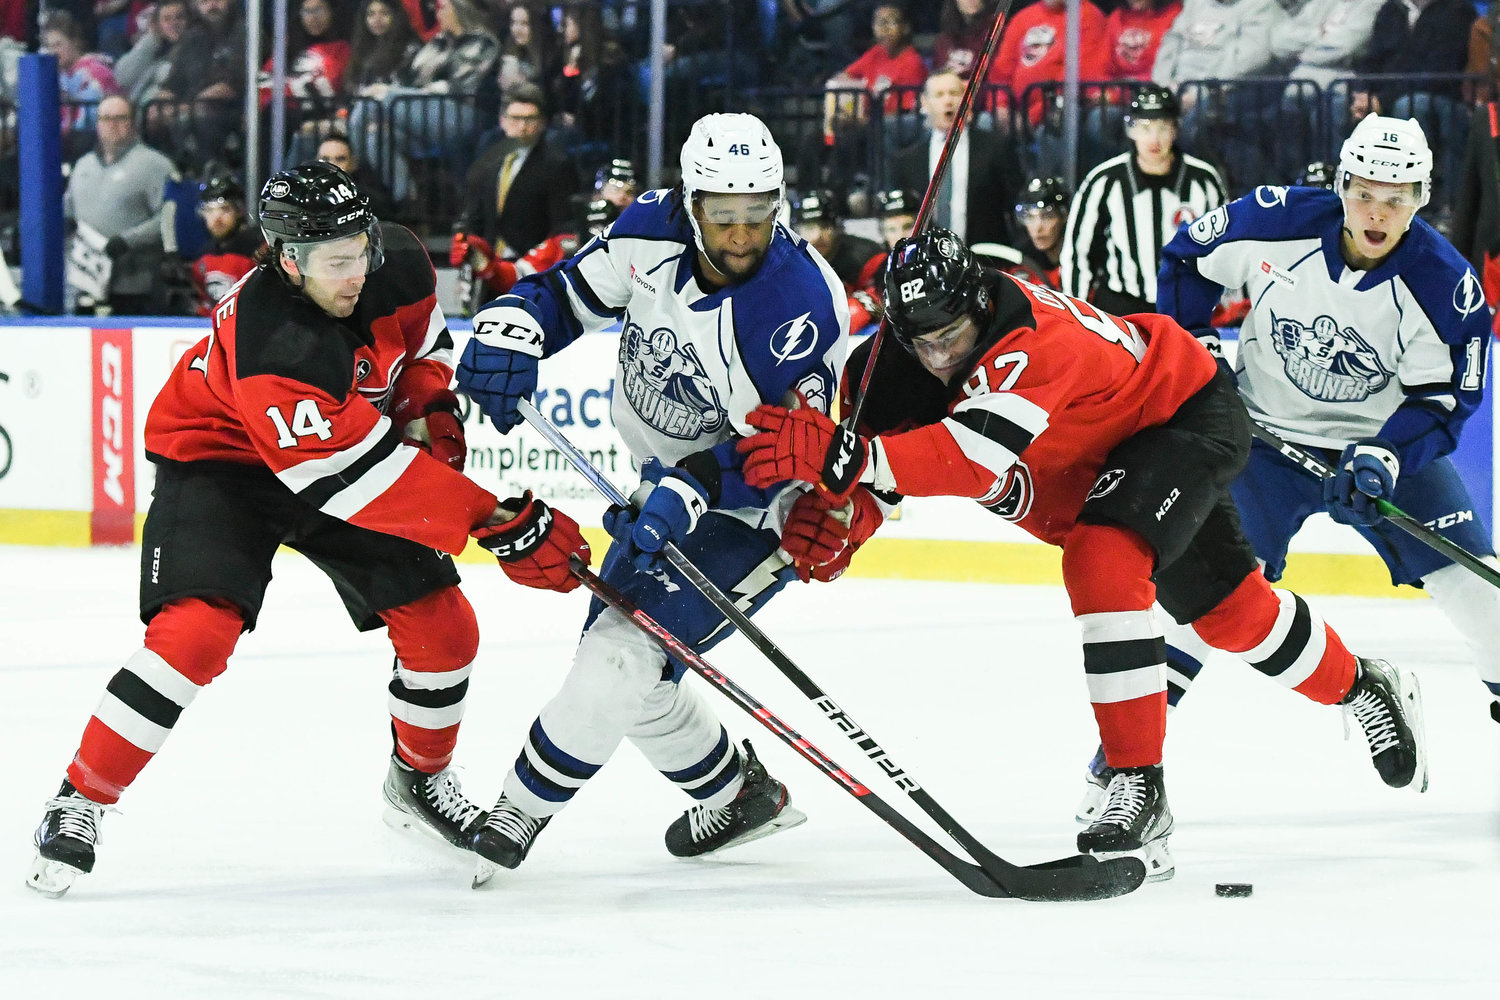 CRUNCH -- Comets players Tyler Irvine and Nikita Okhotiuk defend against Syracuse Crunch player Gemel Smith during the game on Friday night. Okhotiuk had a goal and fight in the 5-1 win.